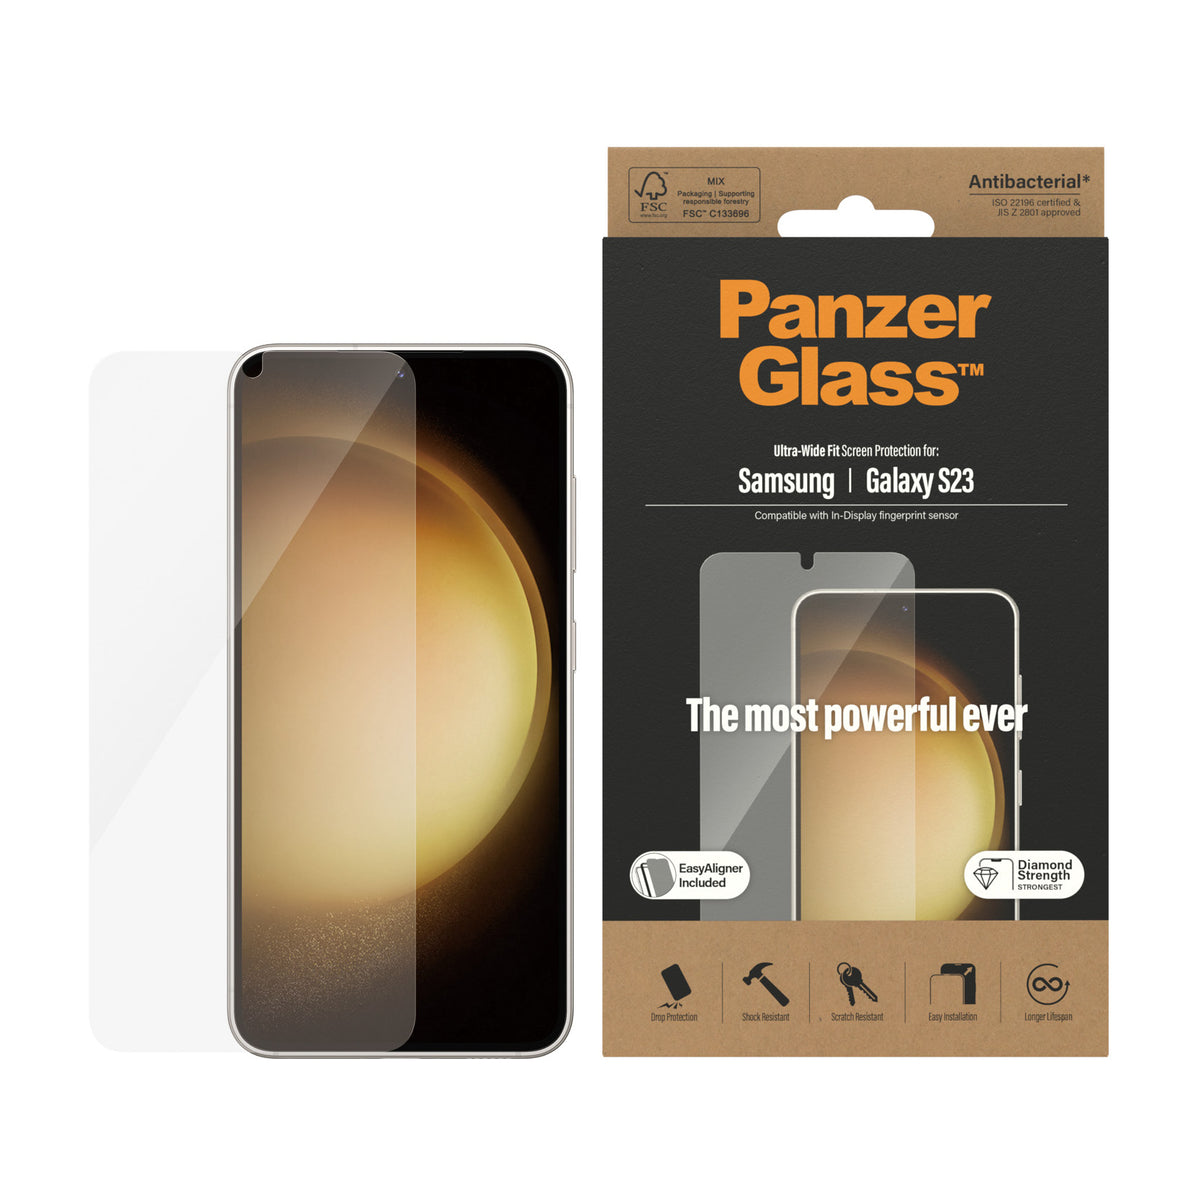 PANZERGLASS Ultra Wide Fit Screen Protector for Samsung Galaxy S23 - Clear with Black Frame